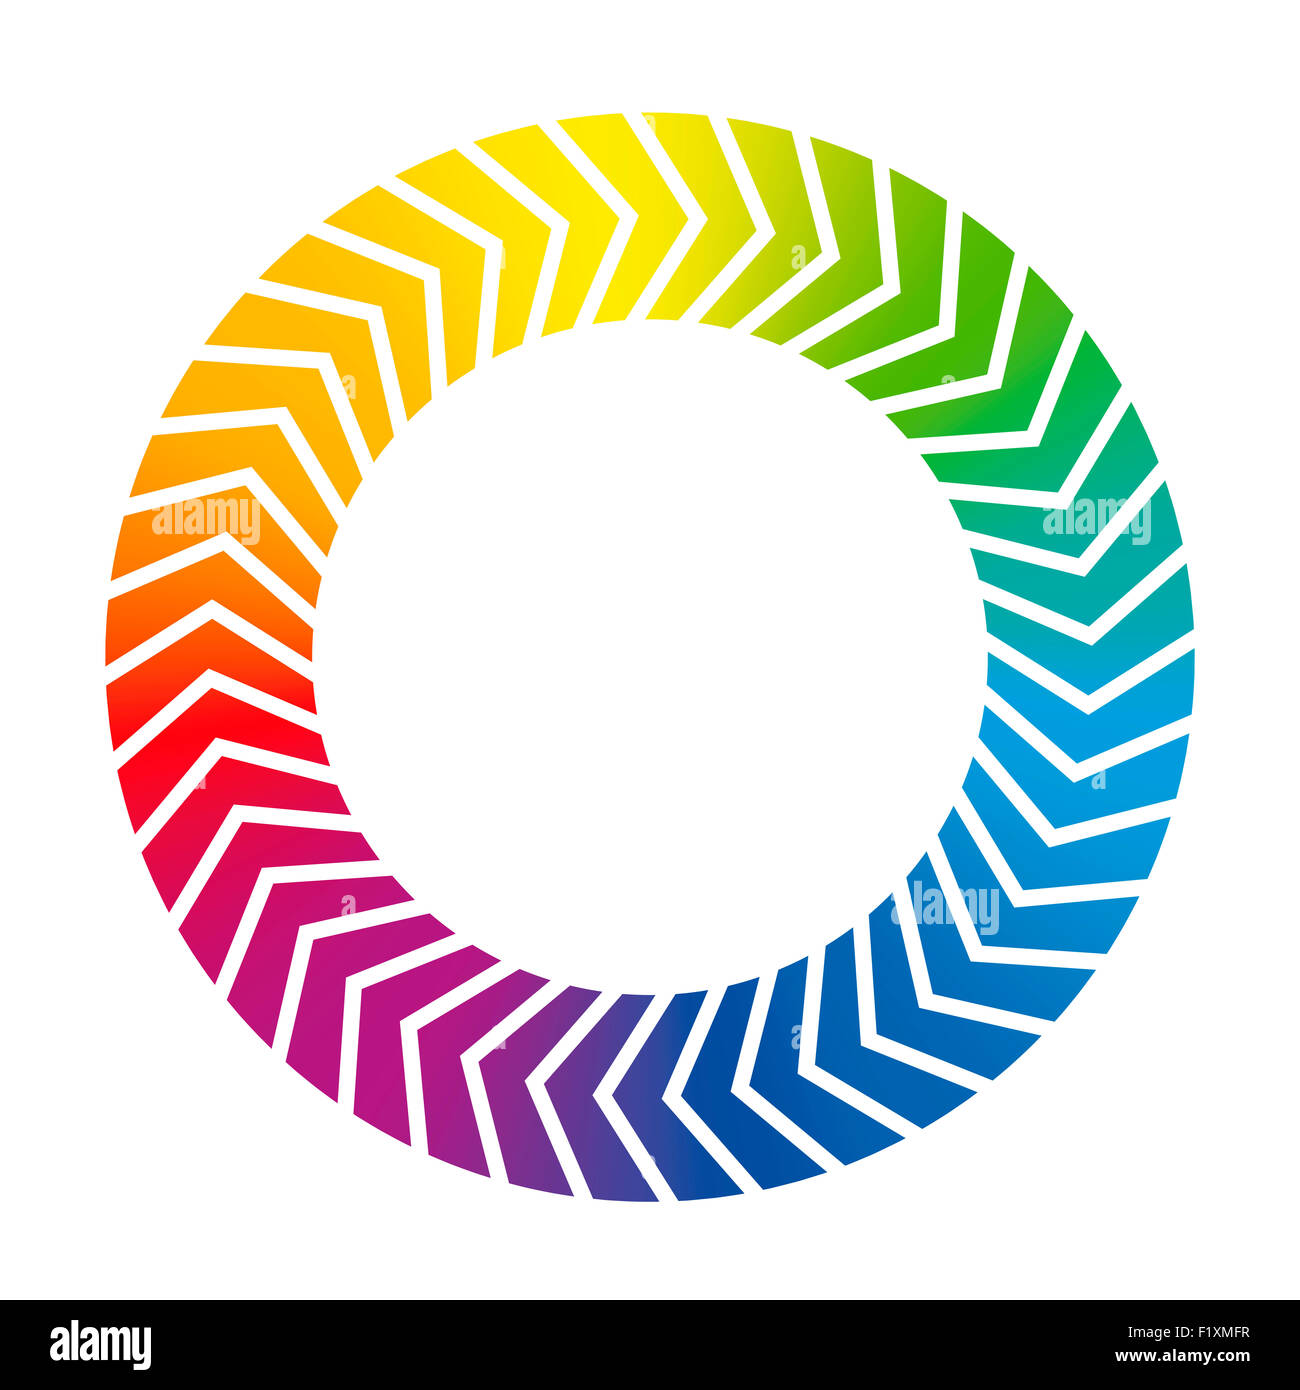 Spinning ring icon. Rainbow colored illustration on white background. Stock Photo